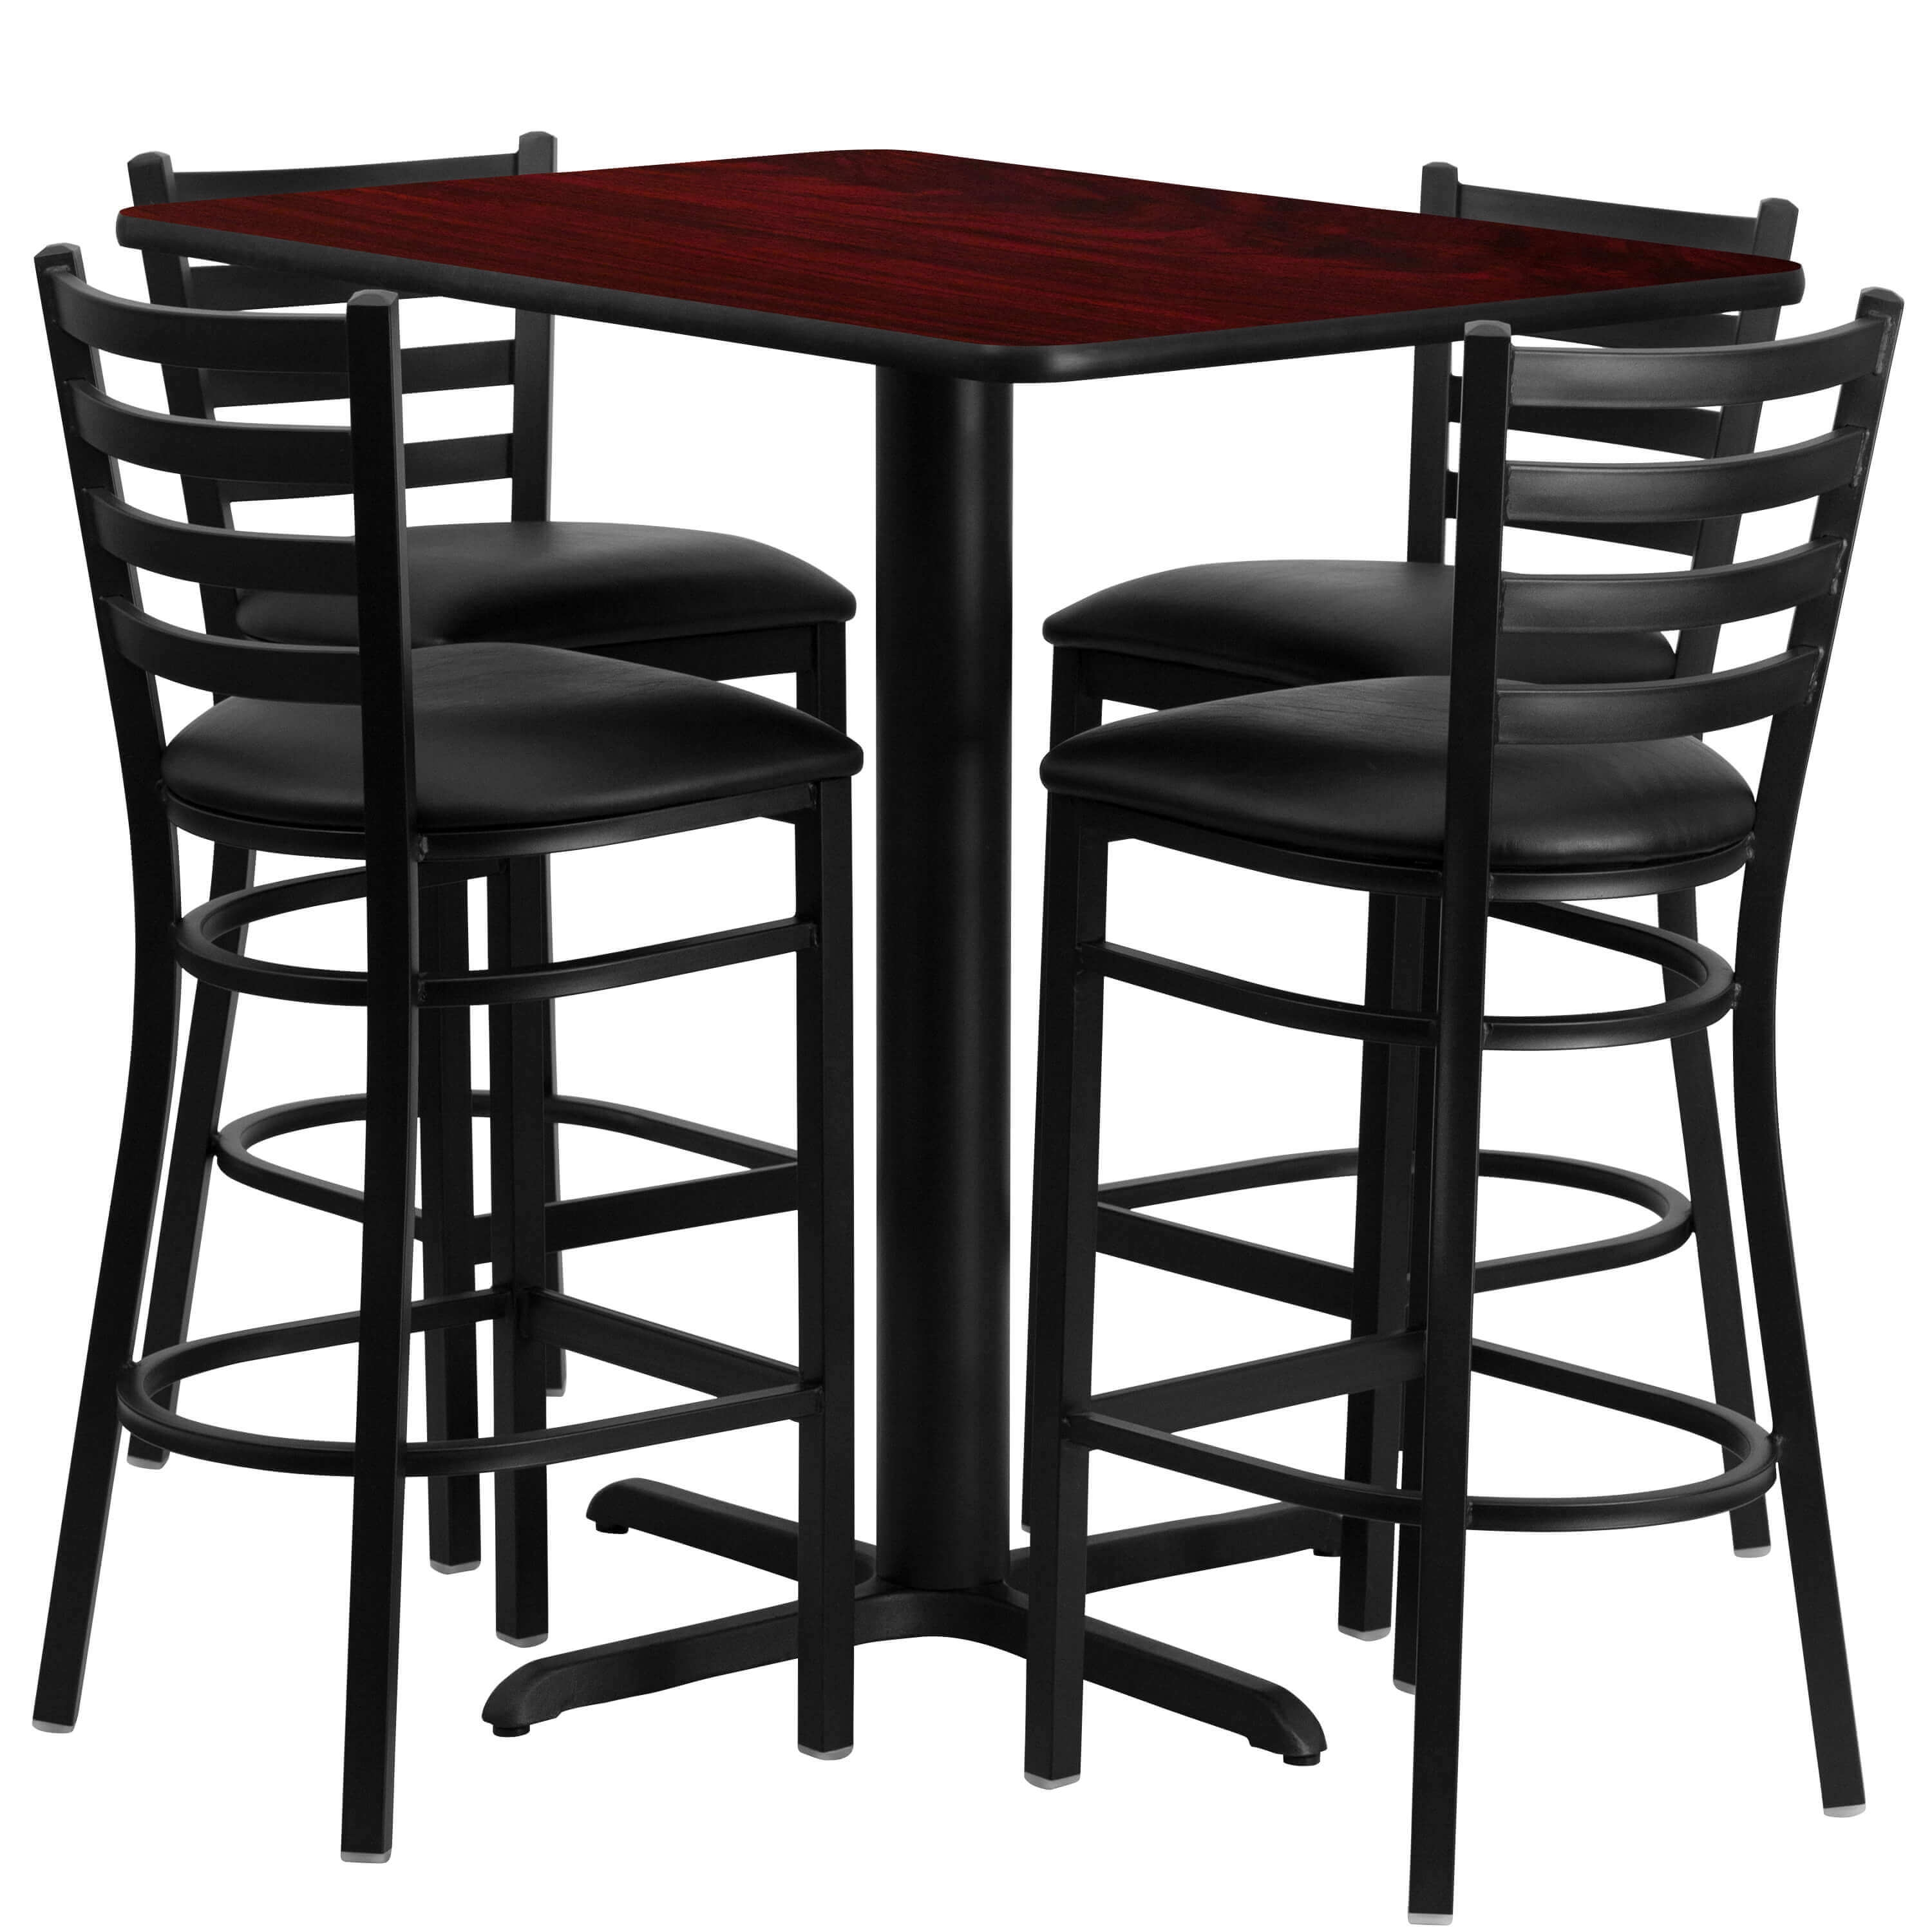 cafe-tables-and-chairs-24inch-cafe-table-set.jpg